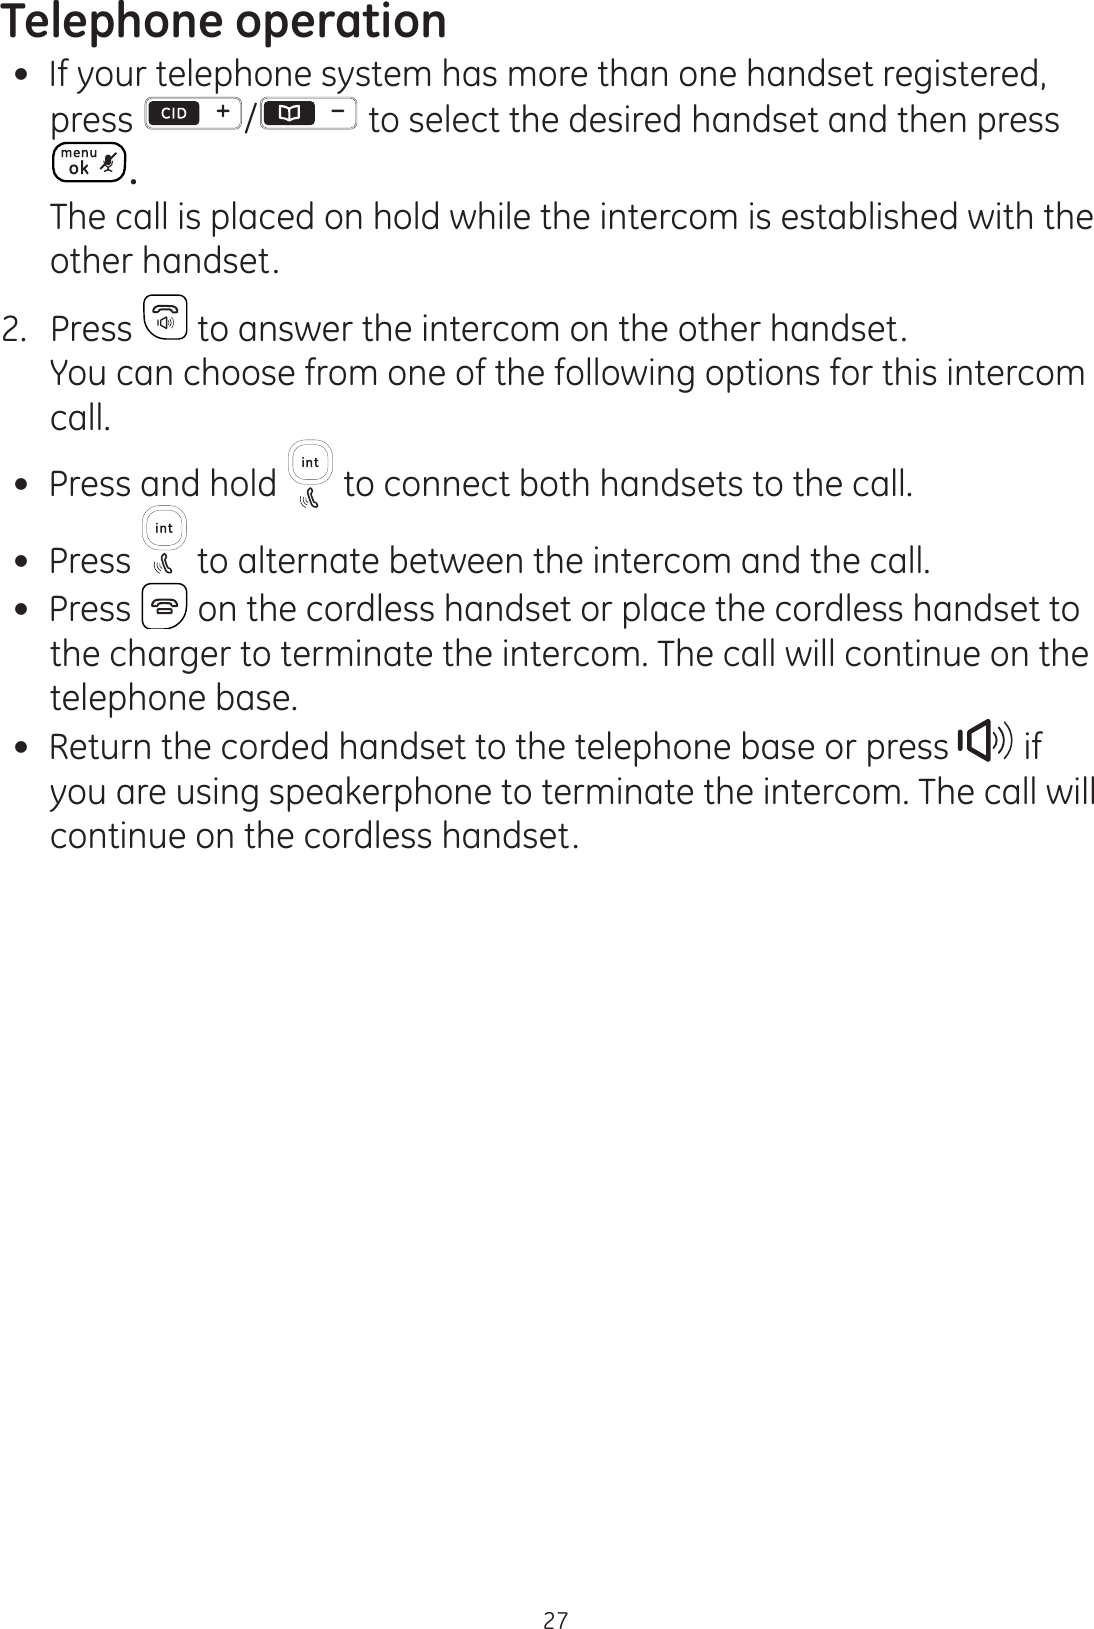 Telephone operation27 If your telephone system has more than one handset registered, press  / to select the desired handset and then press .  The call is placed on hold while the intercom is established with the other handset. 2.  Press   to answer the intercom on the other handset.  You can choose from one of the following options for this intercom call.  Press and hold   to connect both handsets to the call. Press   to alternate between the intercom and the call.  Press   on the cordless handset or place the cordless handset to the charger to terminate the intercom. The call will continue on the telephone base. Return the corded handset to the telephone base or press   if you are using speakerphone to terminate the intercom. The call will continue on the cordless handset. 